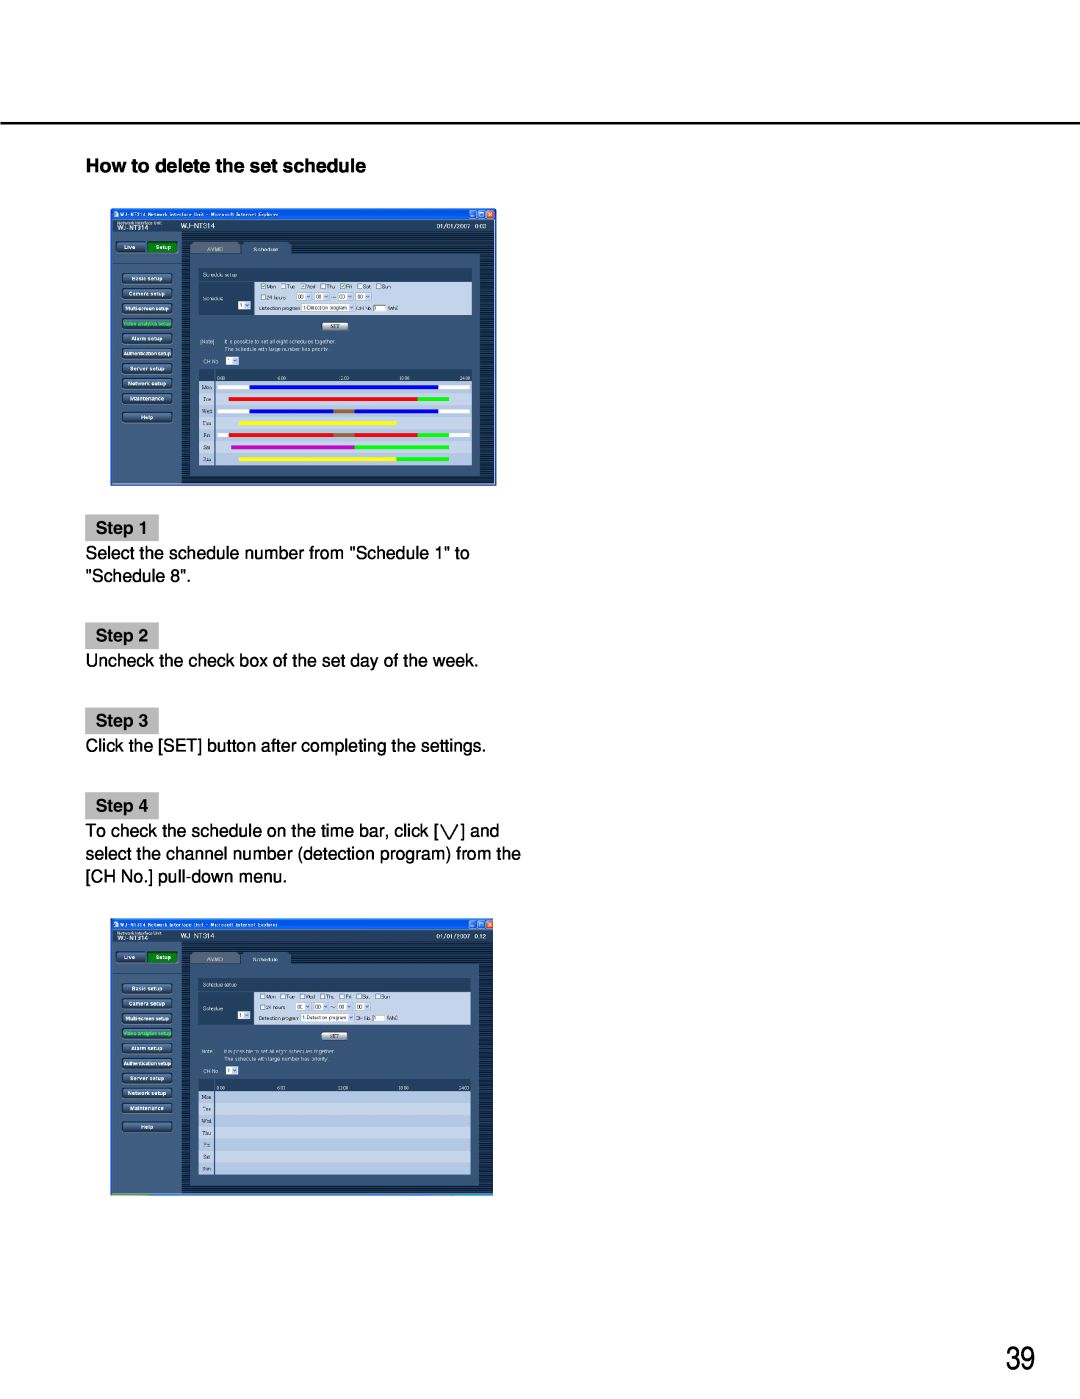 Panasonic WJ-NT314 manual How to delete the set schedule, Step 